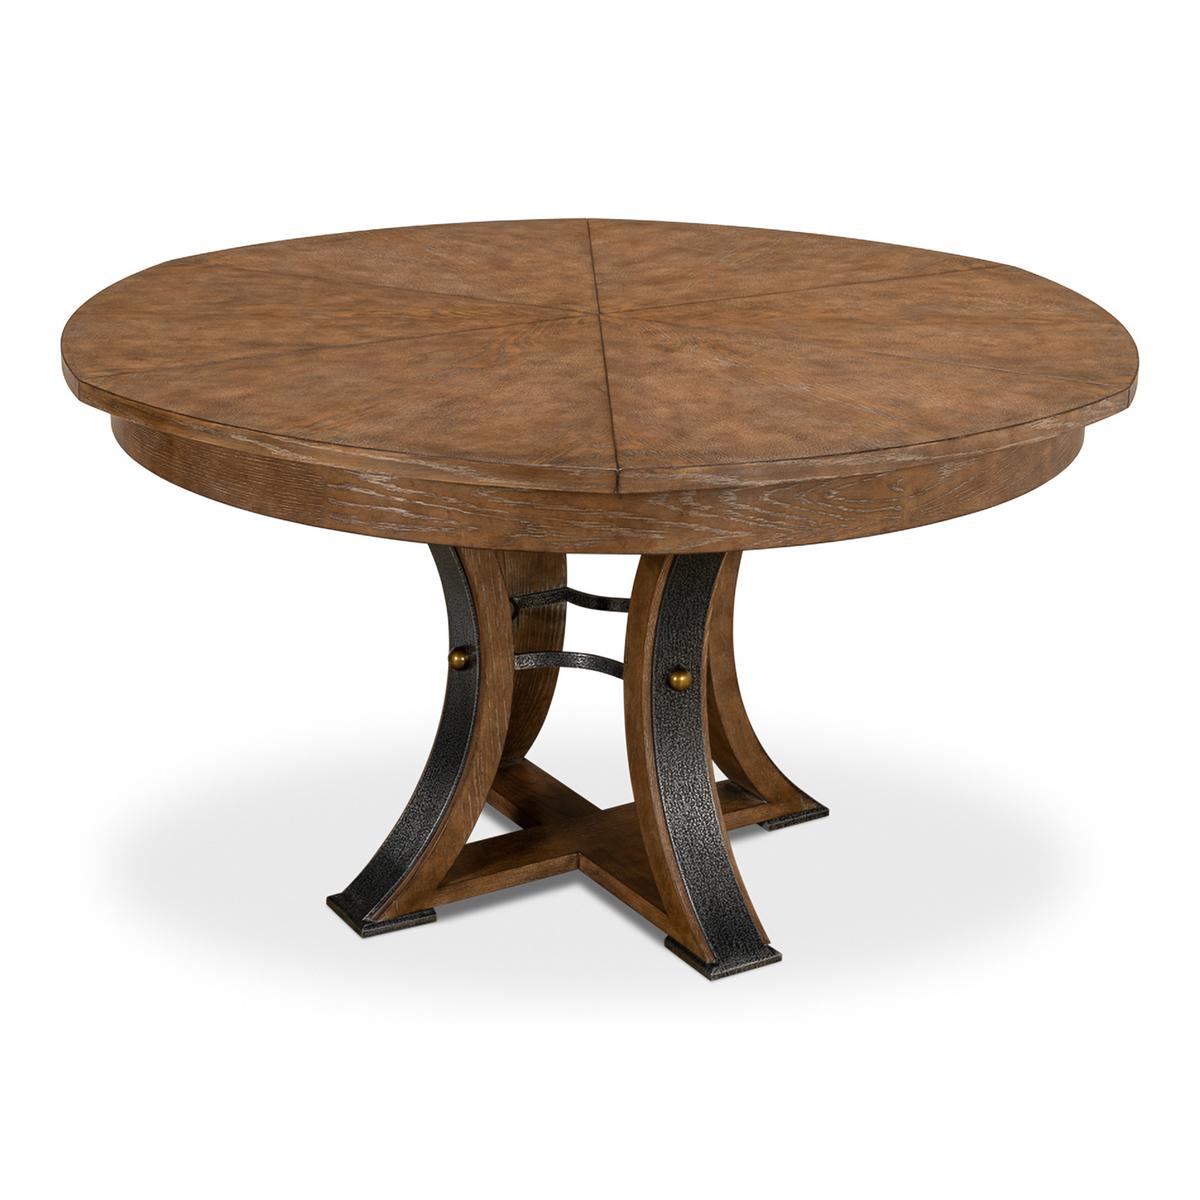 Modern Industrial Round Dining Table - 70 - Light Mink In New Condition For Sale In Westwood, NJ